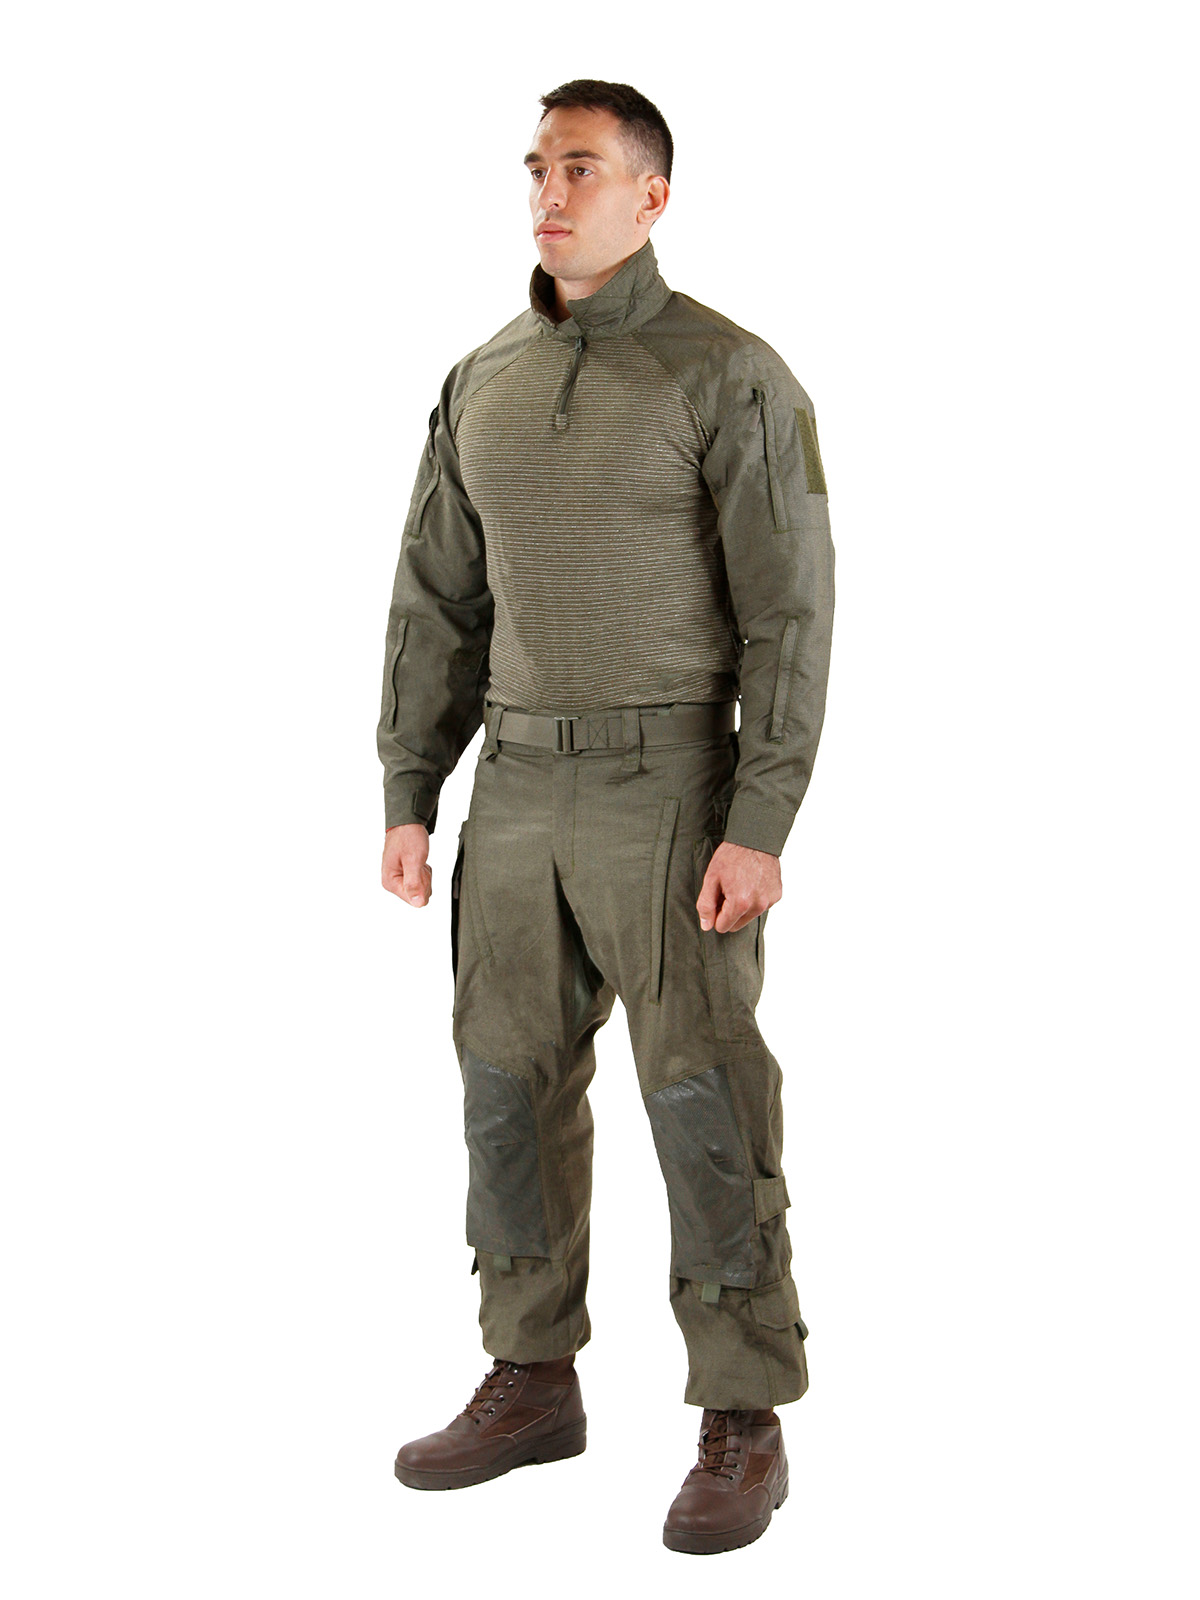 SOURCE Duratec Advanced Combat Clothing System (ACCS) - Source